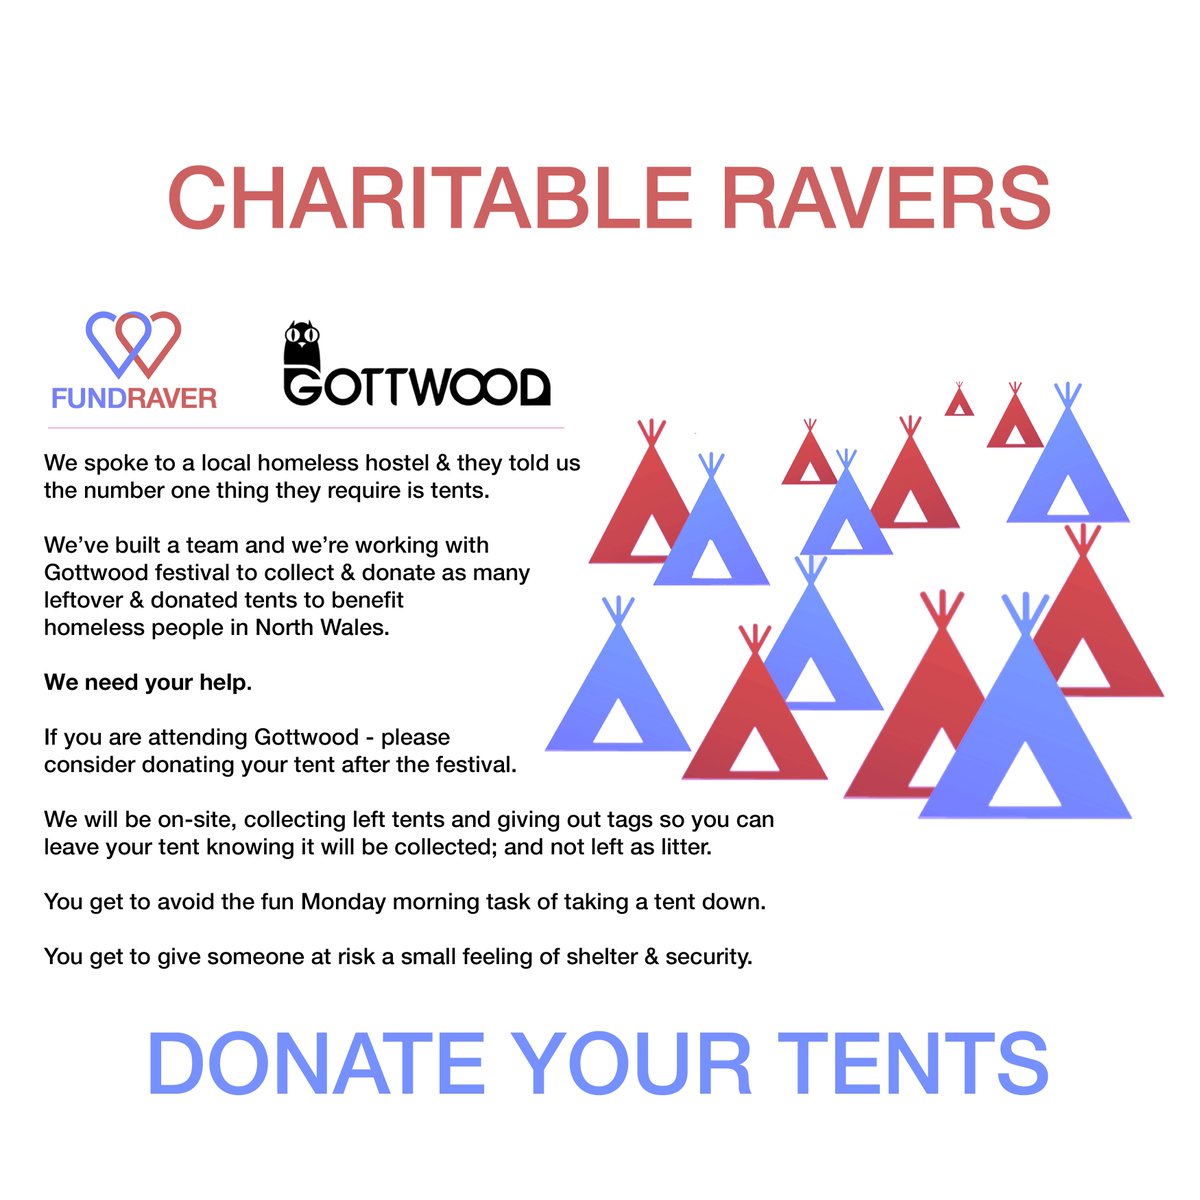 We're heading to @Gottwood to collect tents to distribute to #NorthWales homeless hostels and daycentres, plus have a little dance in the woods - @northwalesha #Anglesey #socialenterprise #raveandgive